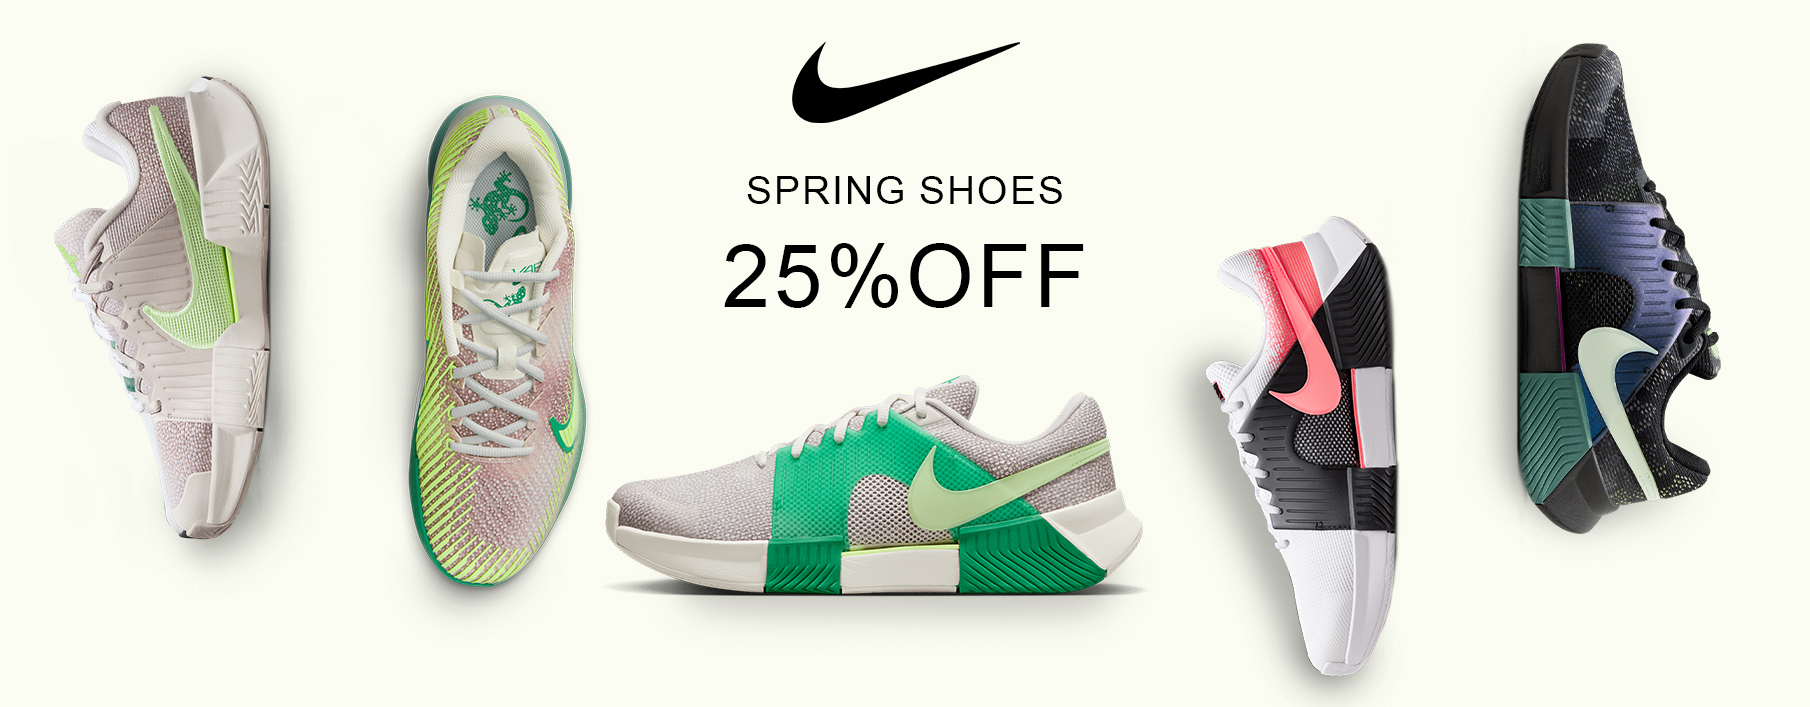 nike spring tennis shoes discount sale